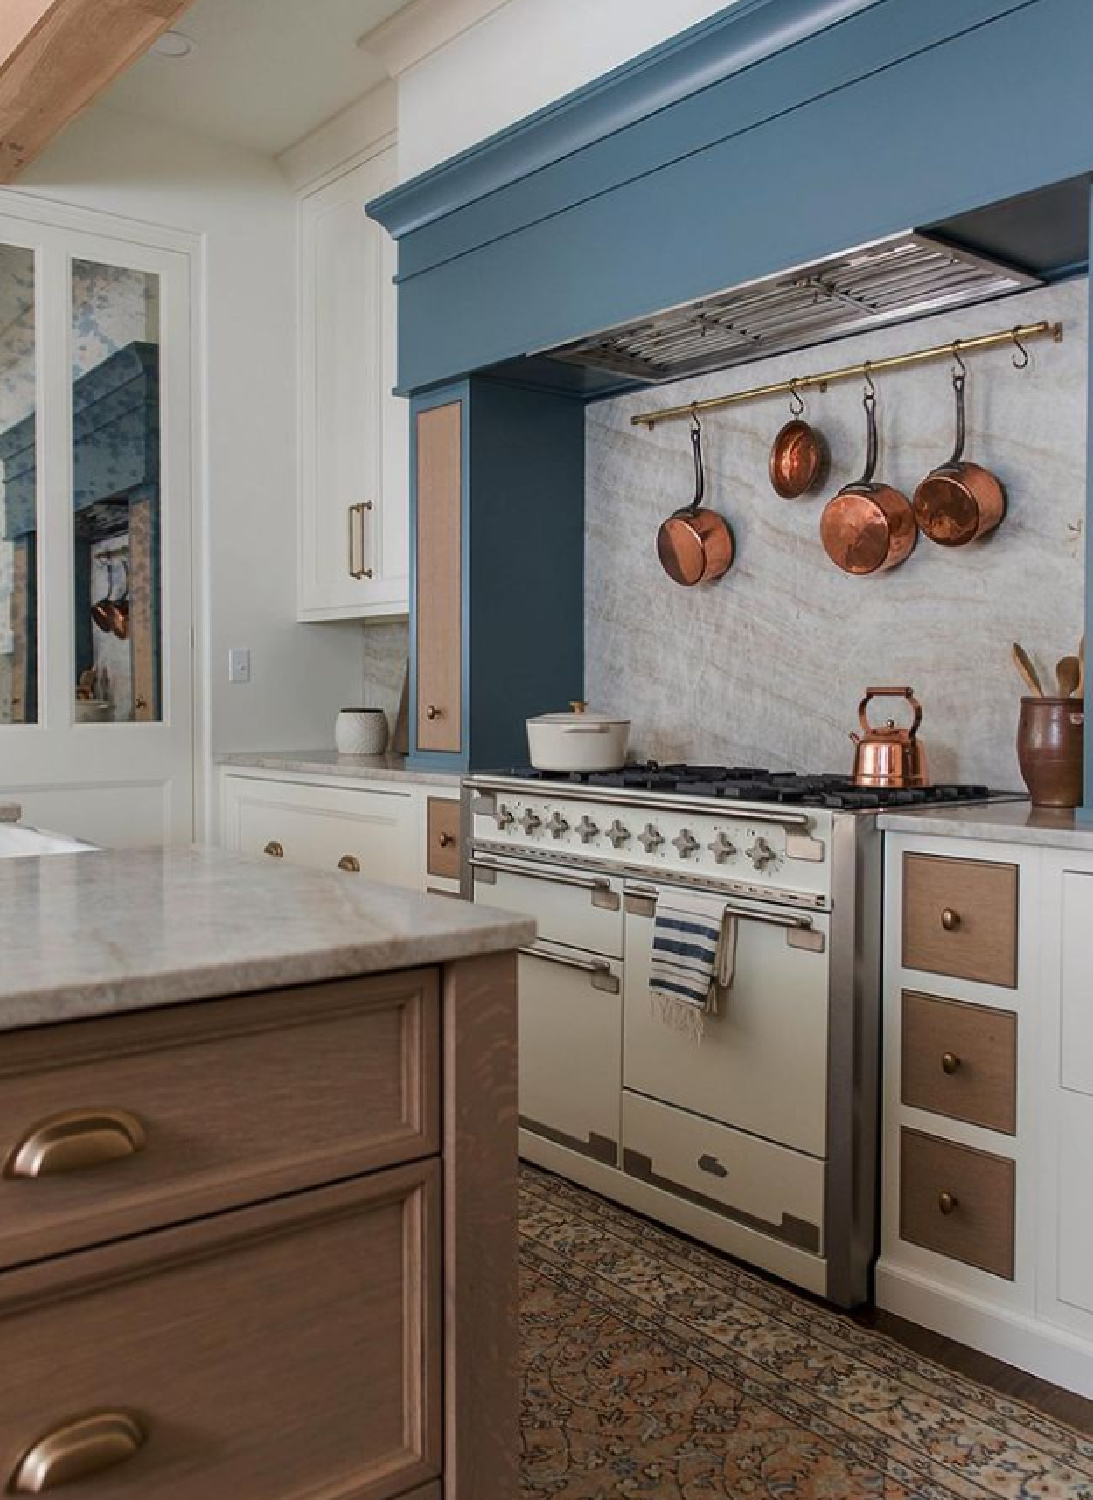 Traditional French country kitchen with blue painted range hood, French range, and copper pots - Whittney Parkinson. #frenchkitchens #bluekitchens